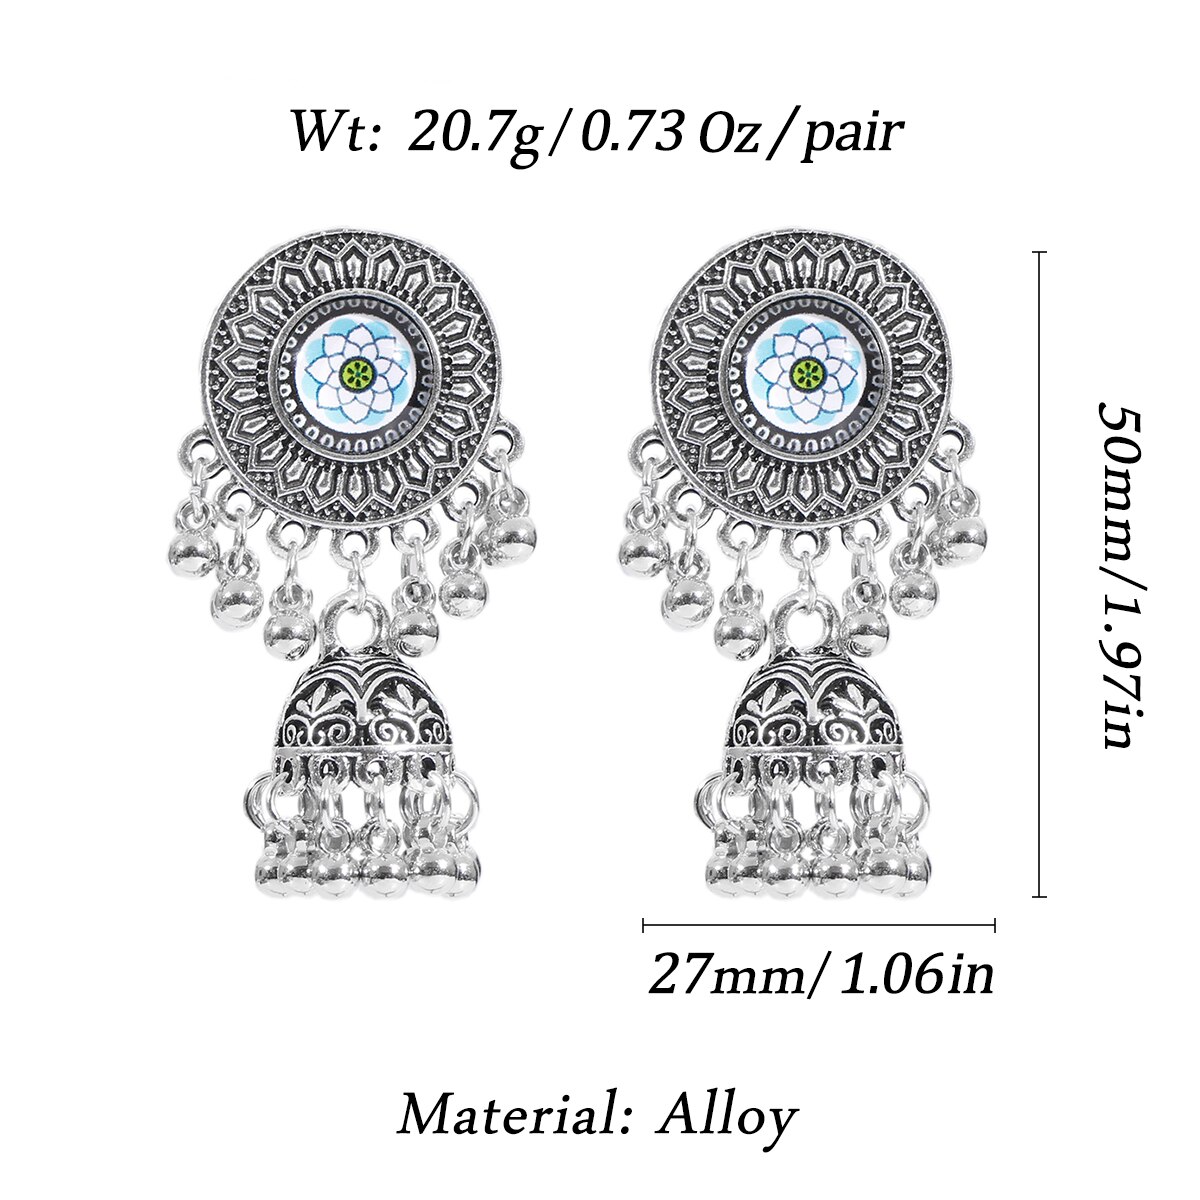 Classic-Vintage-Silver-Color-Alloy-Carved-Bollywood-Oxidized-Earrings-For-Women-Ethnic-Rose-Red-Jhum-1005003651700580-9